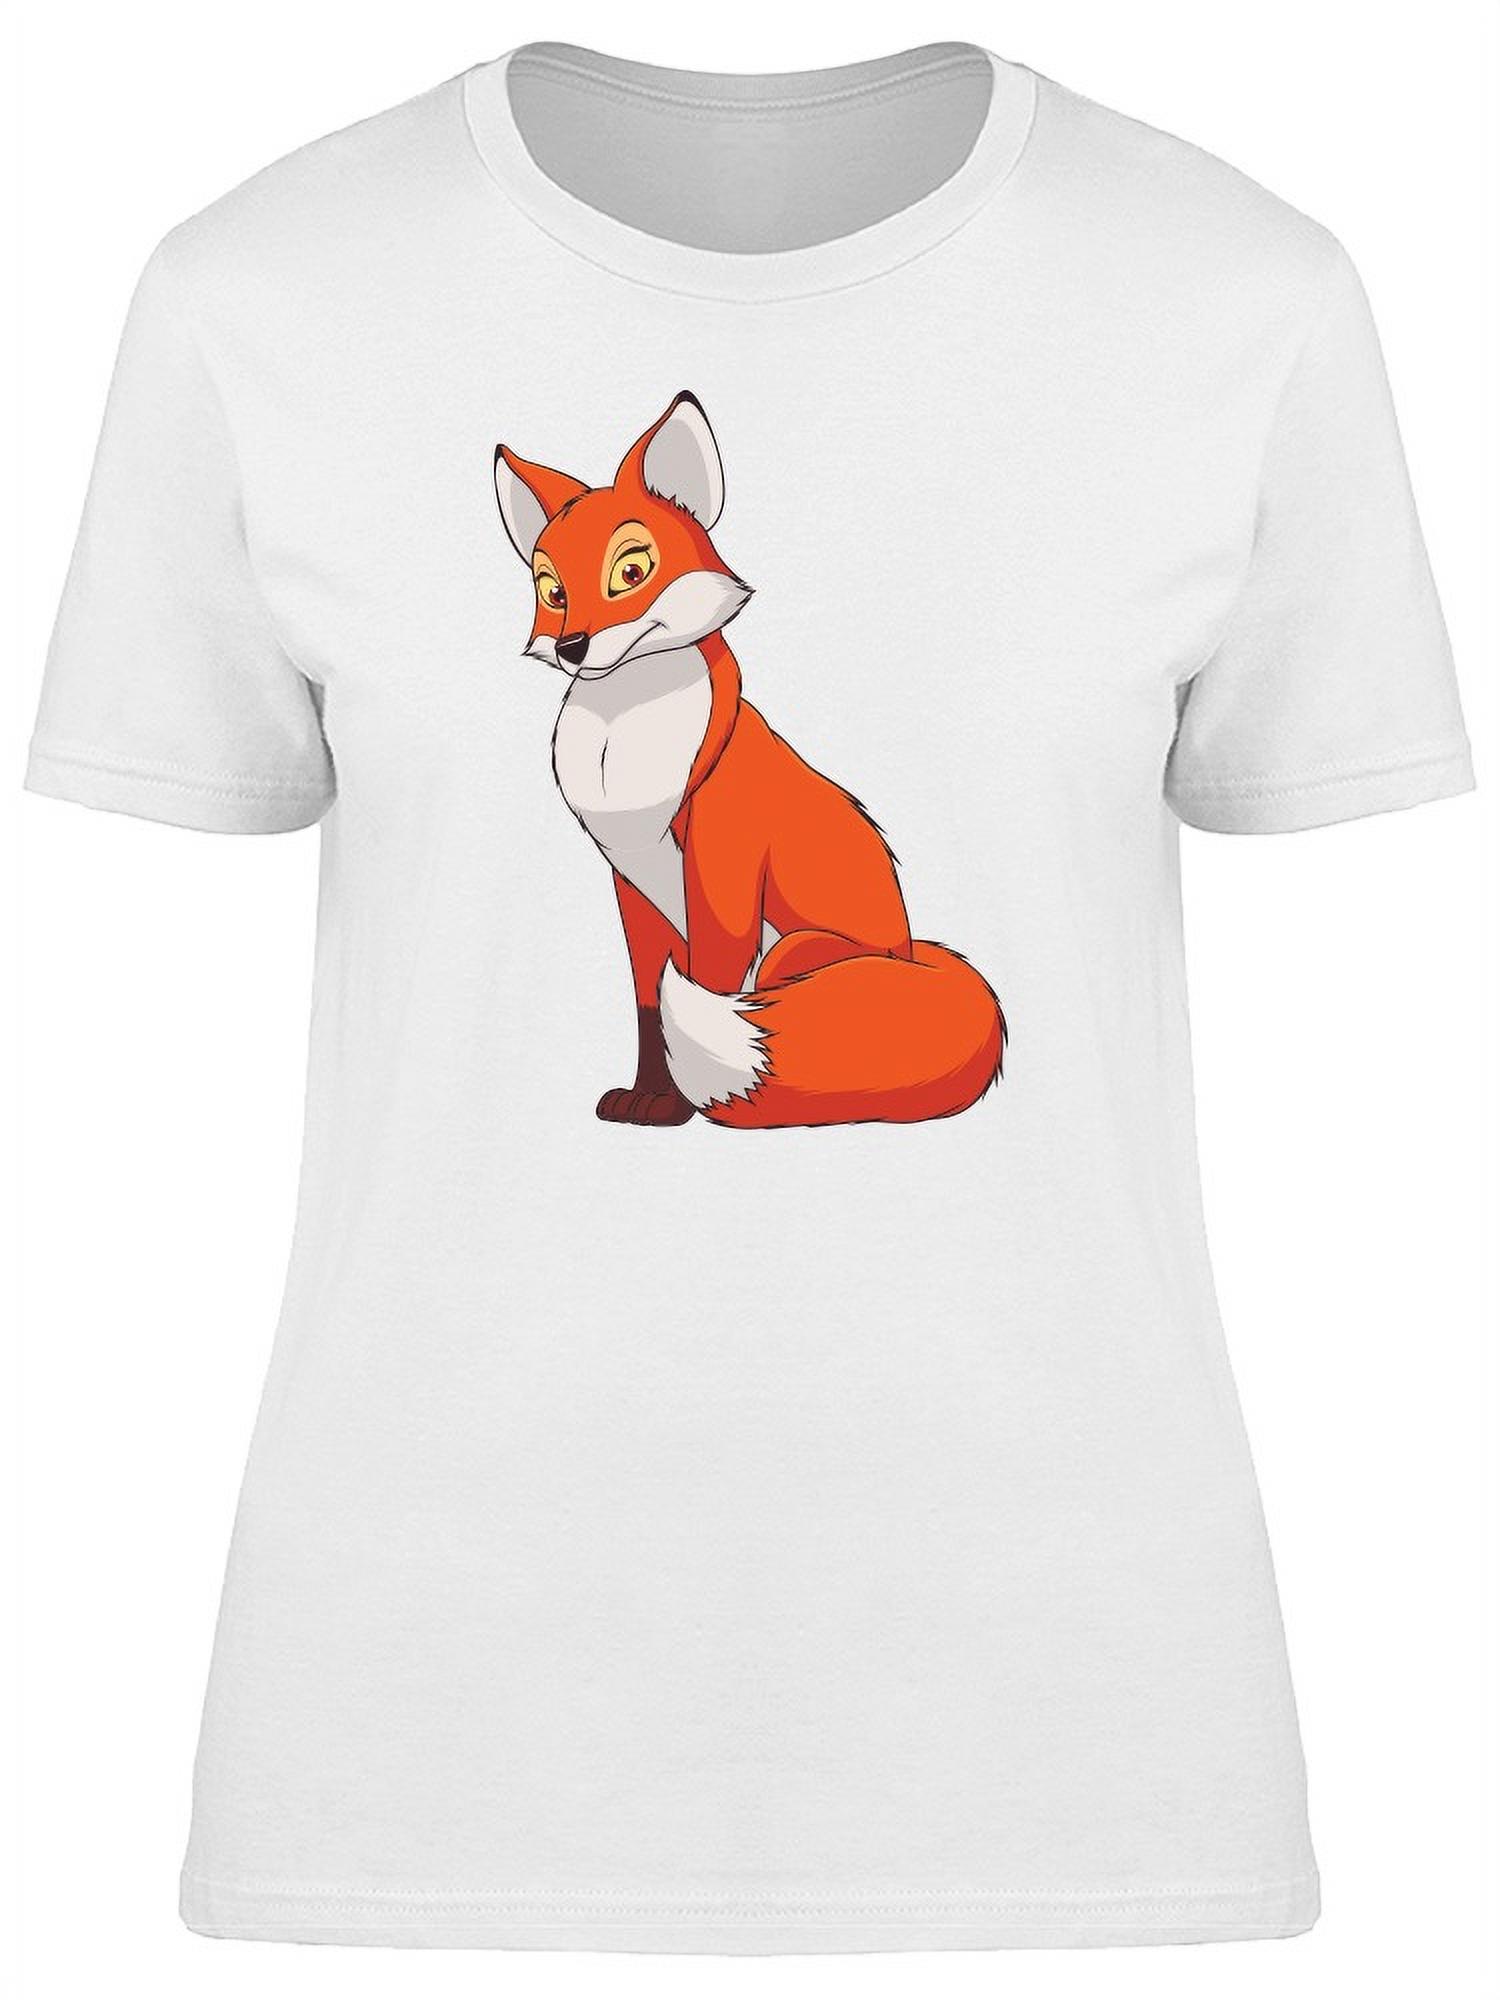 Cute Female Red Fox T-Shirt Women -Image by Shutterstock, Female Small - image 1 of 2